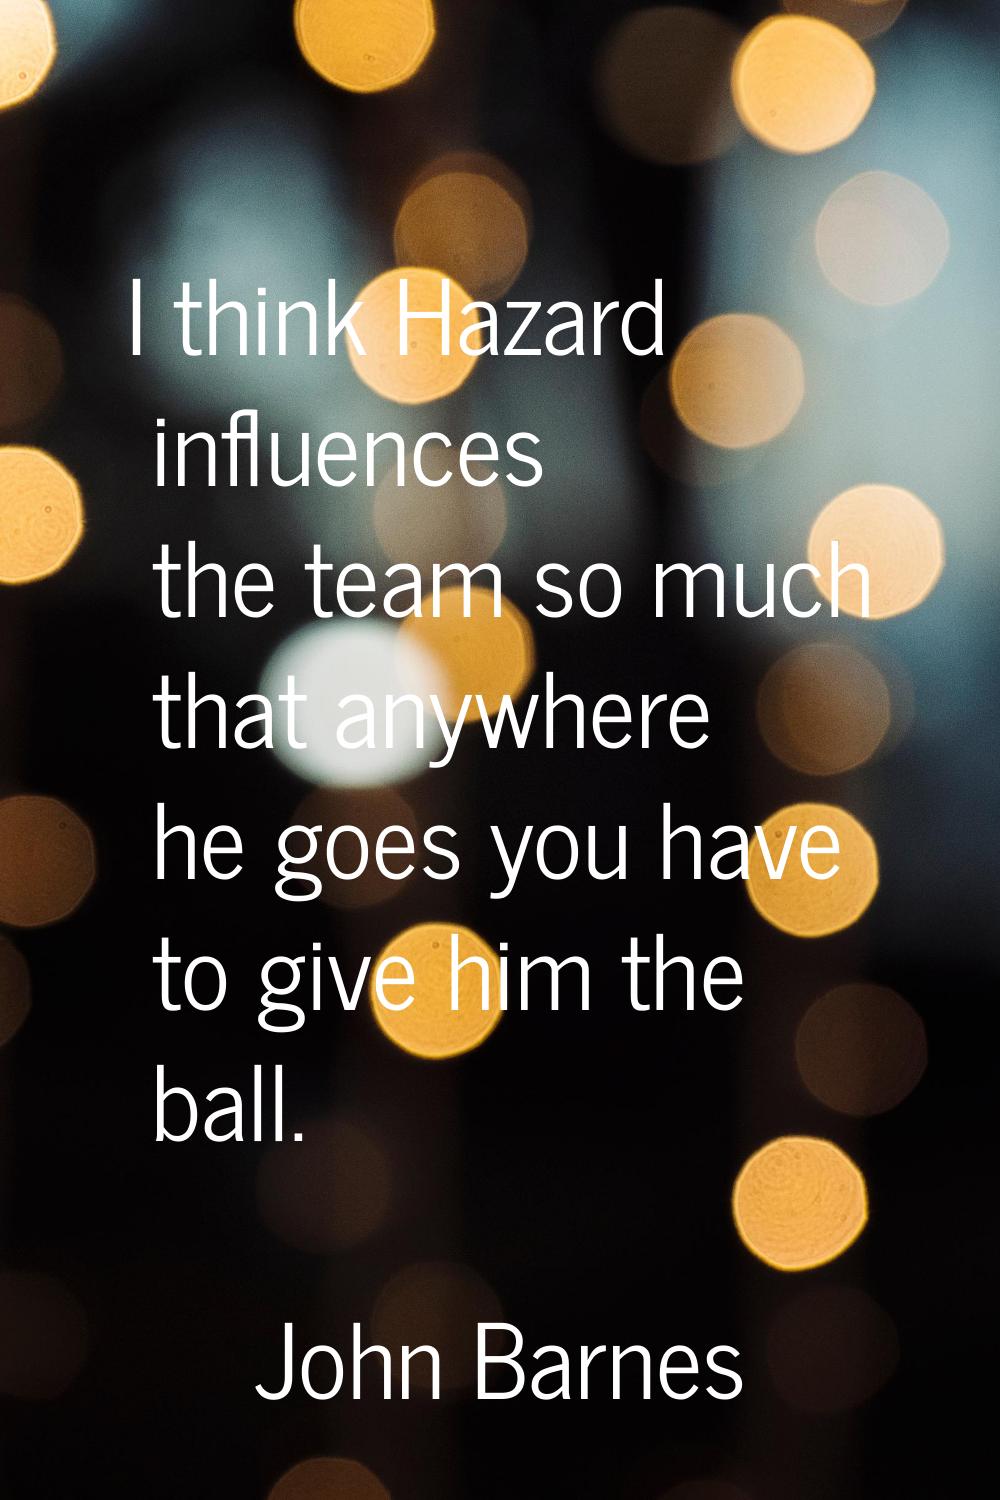 I think Hazard influences the team so much that anywhere he goes you have to give him the ball.